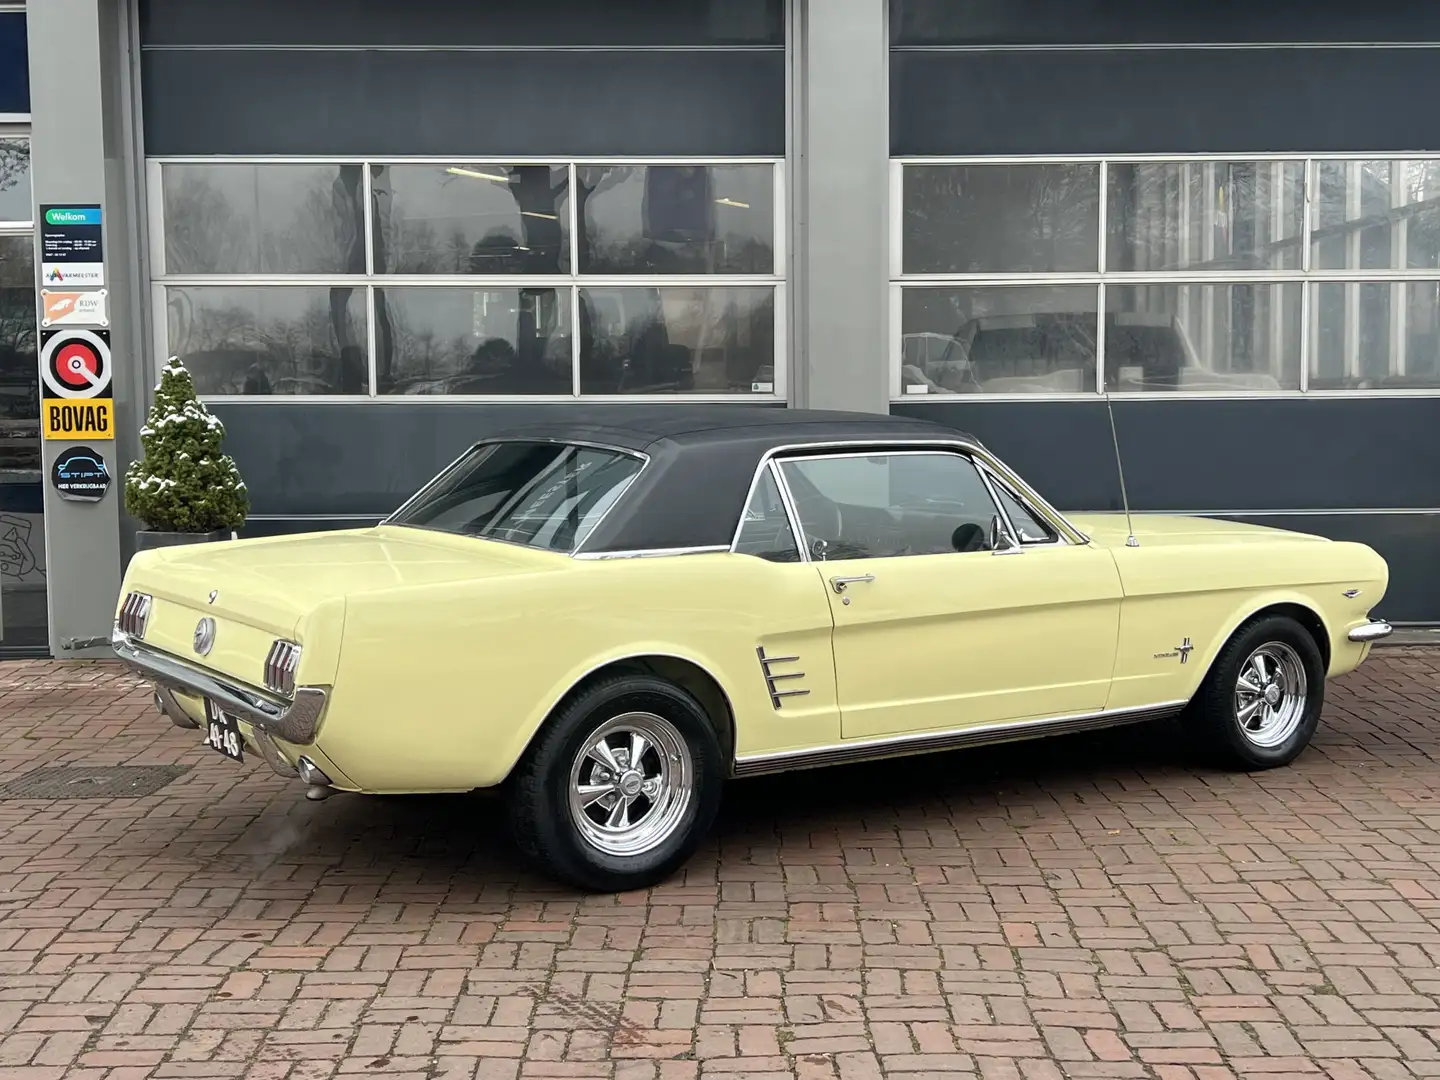 Ford Mustang USA 4.6 V8 LPG GT 289 Bj 1966 TOP STAAT 301PK !! m Beige - 2